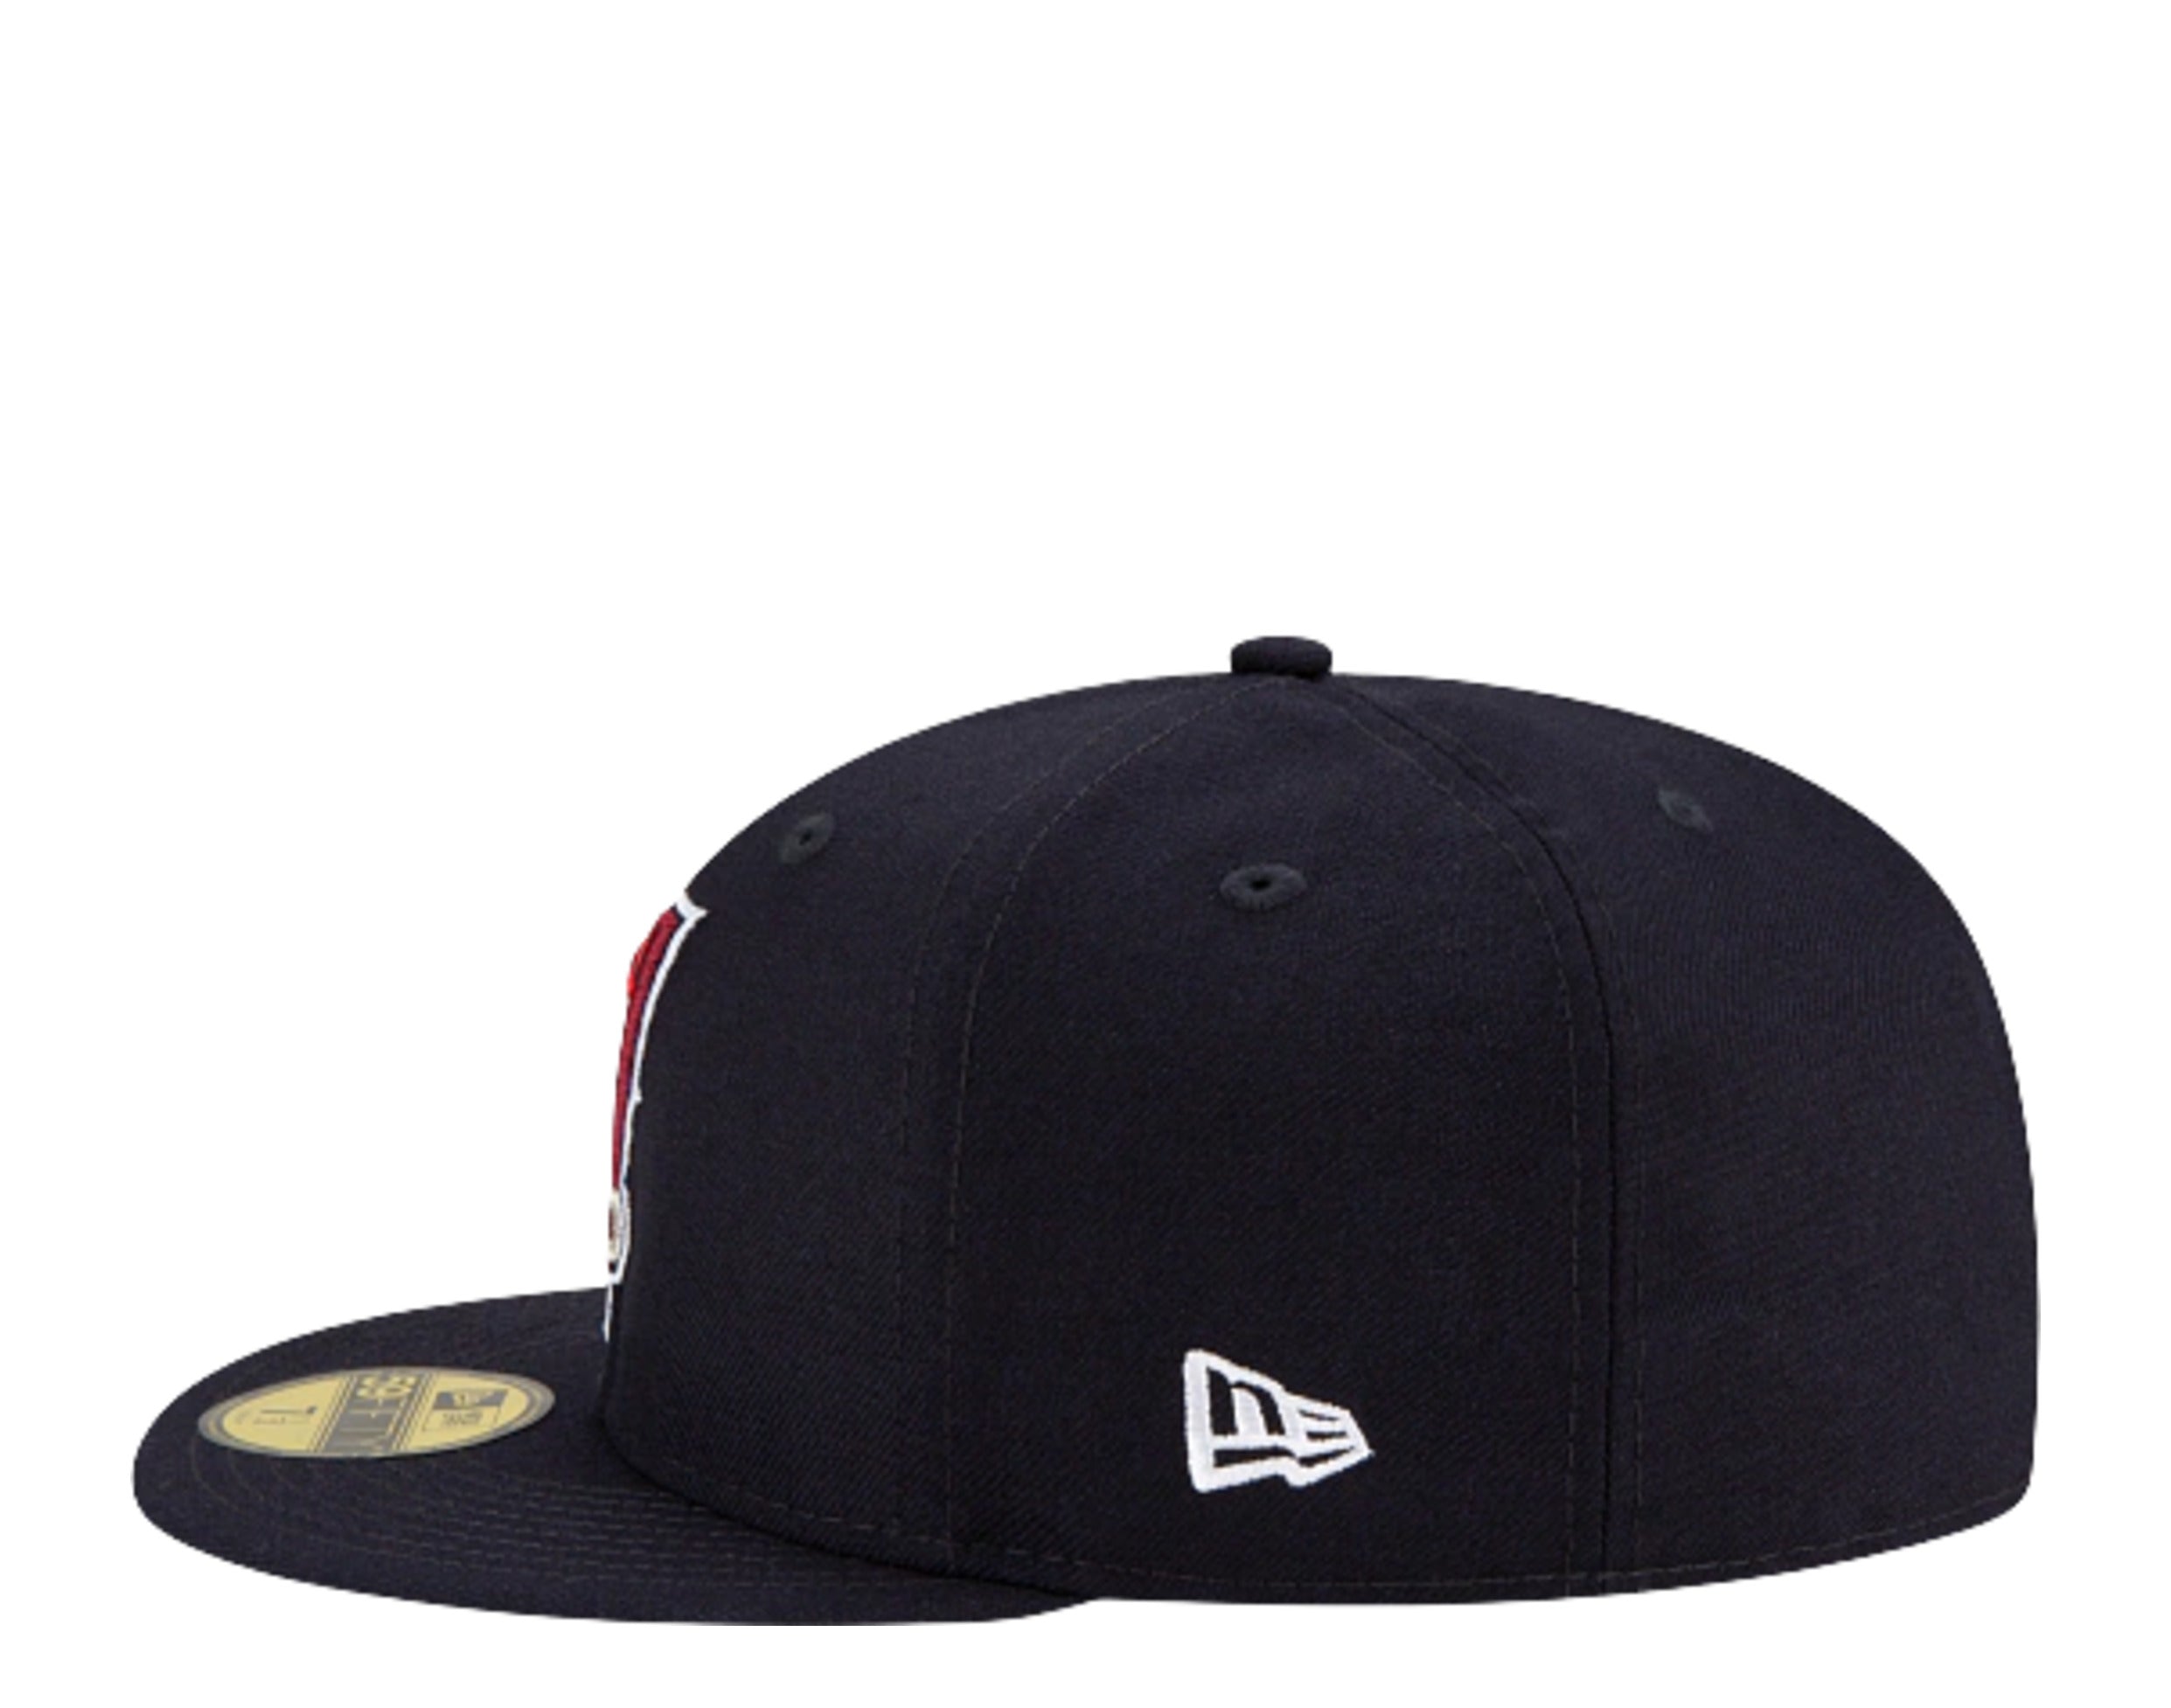 MLB Upside Down Logo 59Fifty Fitted Hat Collection by MLB x New Era